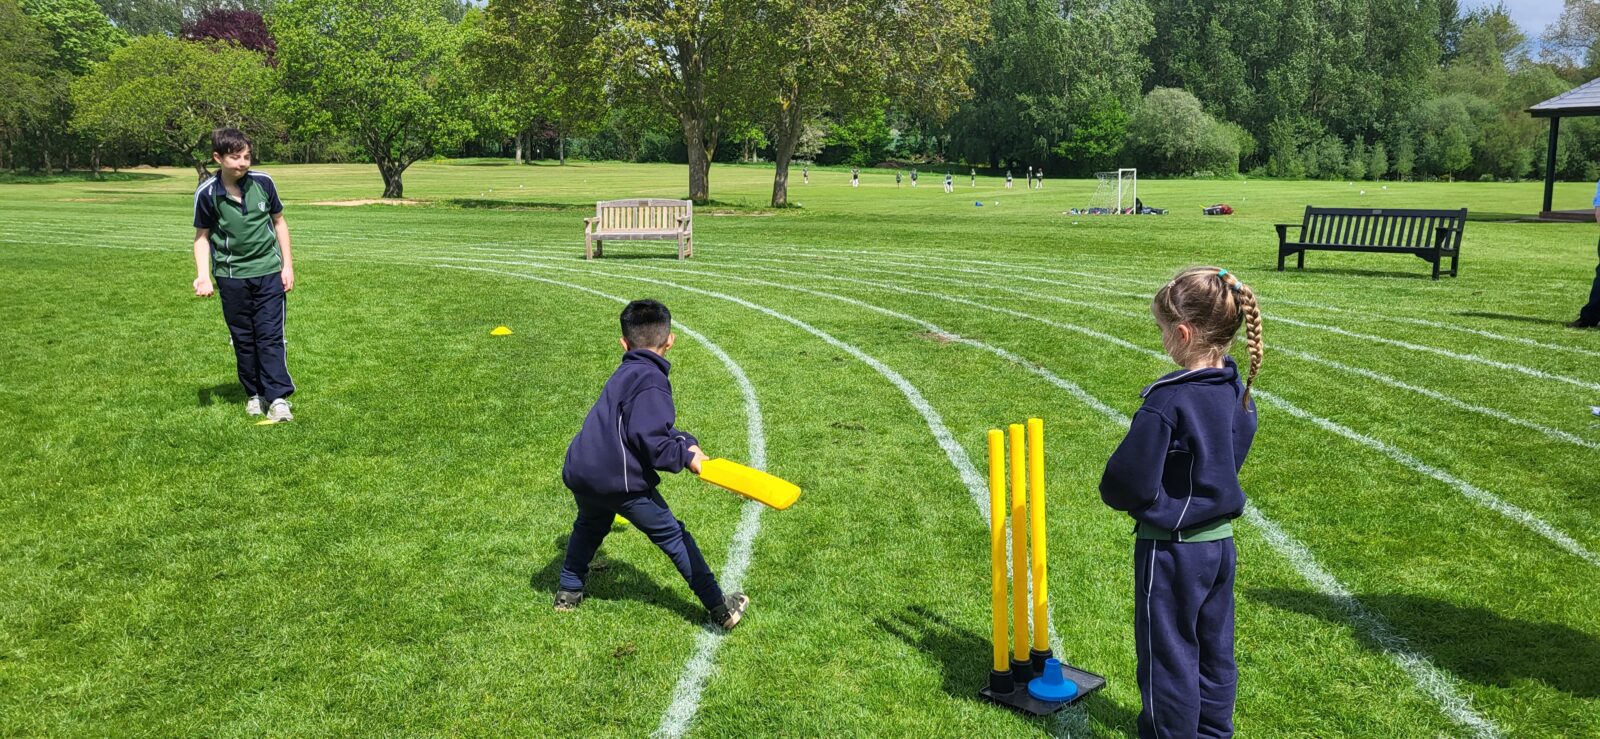 Young children practising cricket skills on school playing field